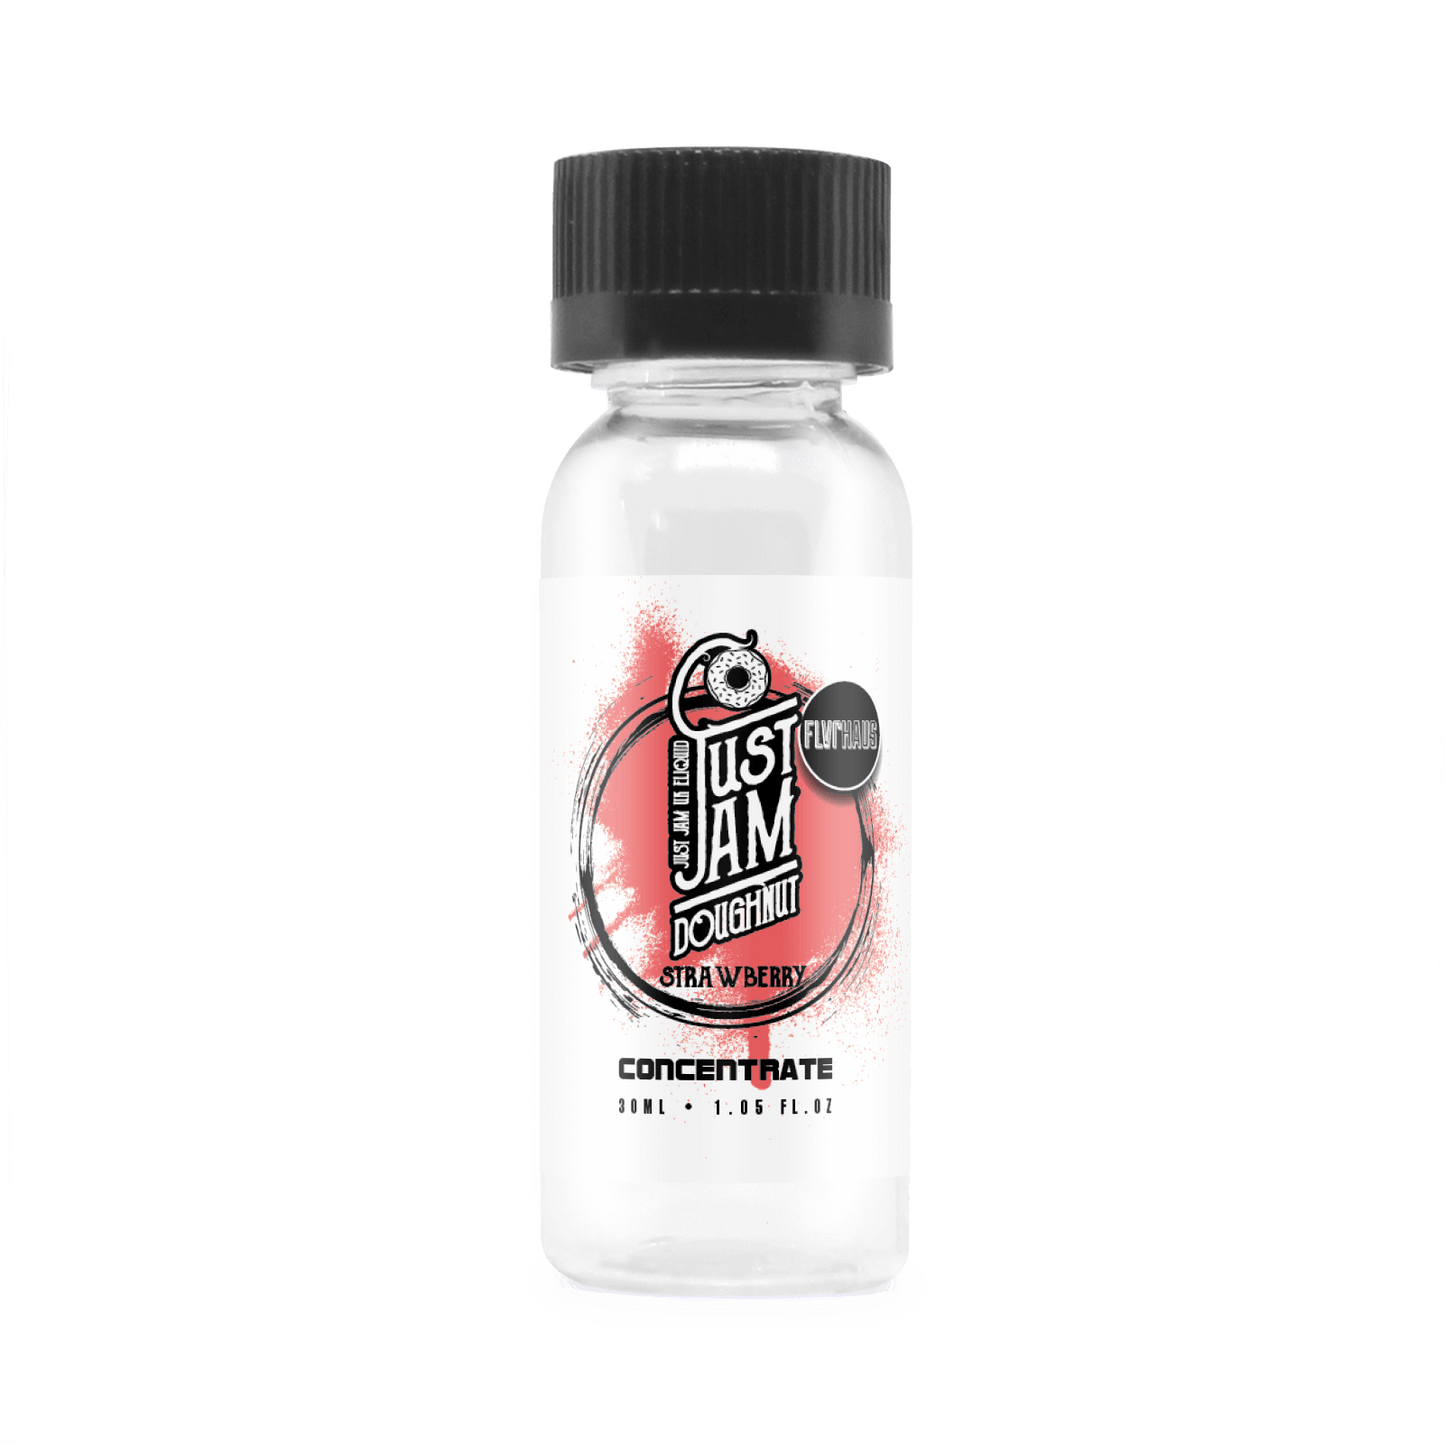 Just Jam - Strawberry Doughnut Concentrate 30ml - The Ace Of Vapez